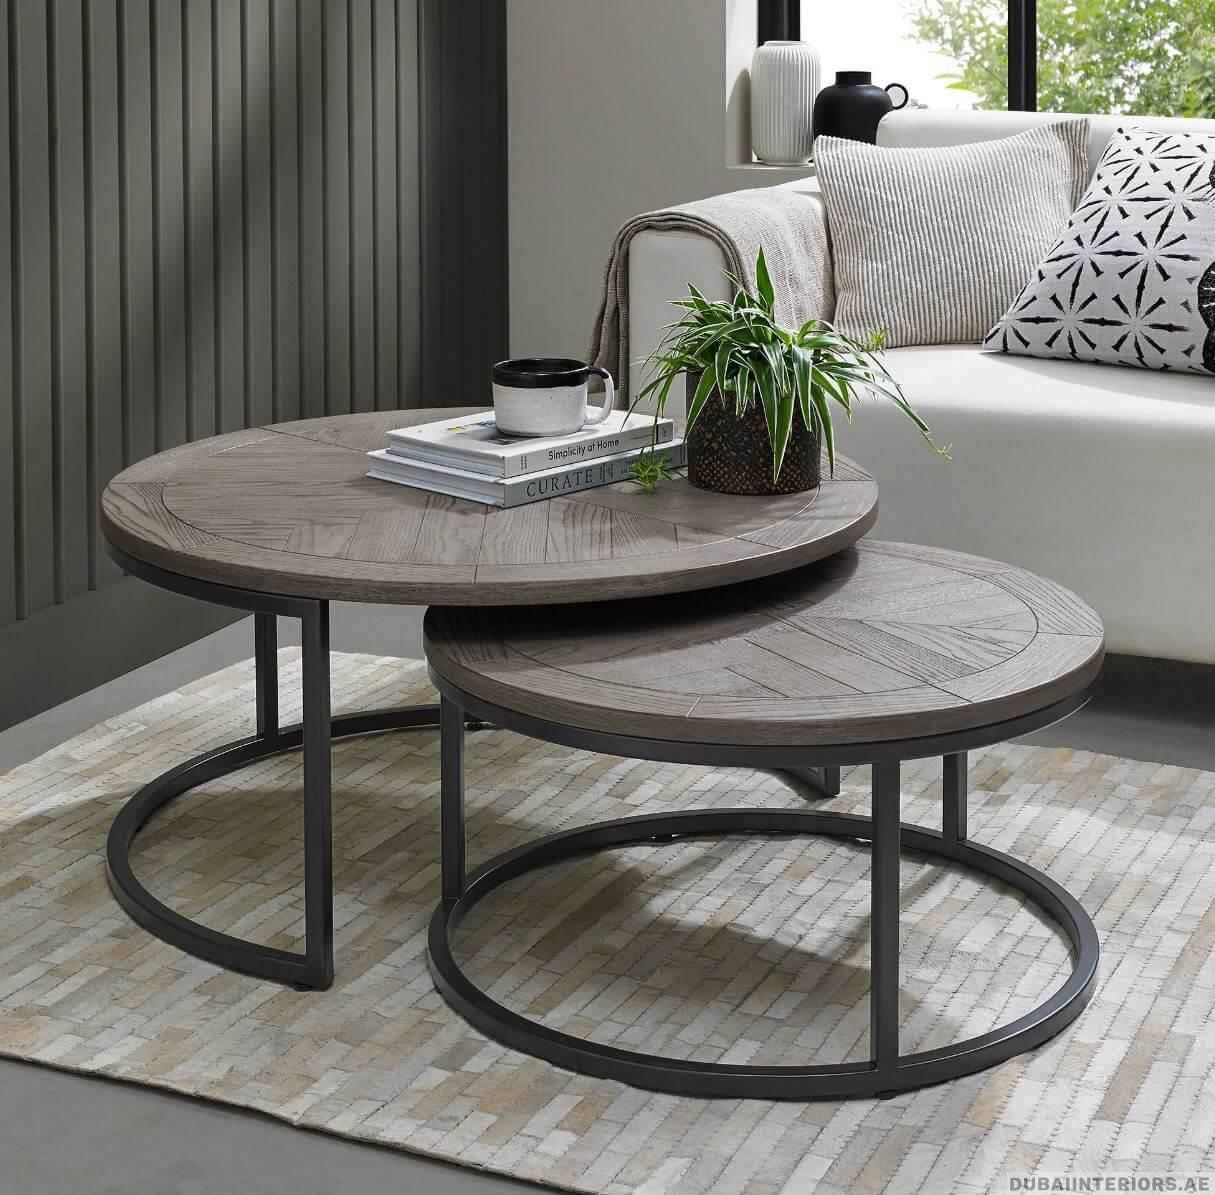 Metal Coffee Table Legs: Give your coffee table a modern, DKFON